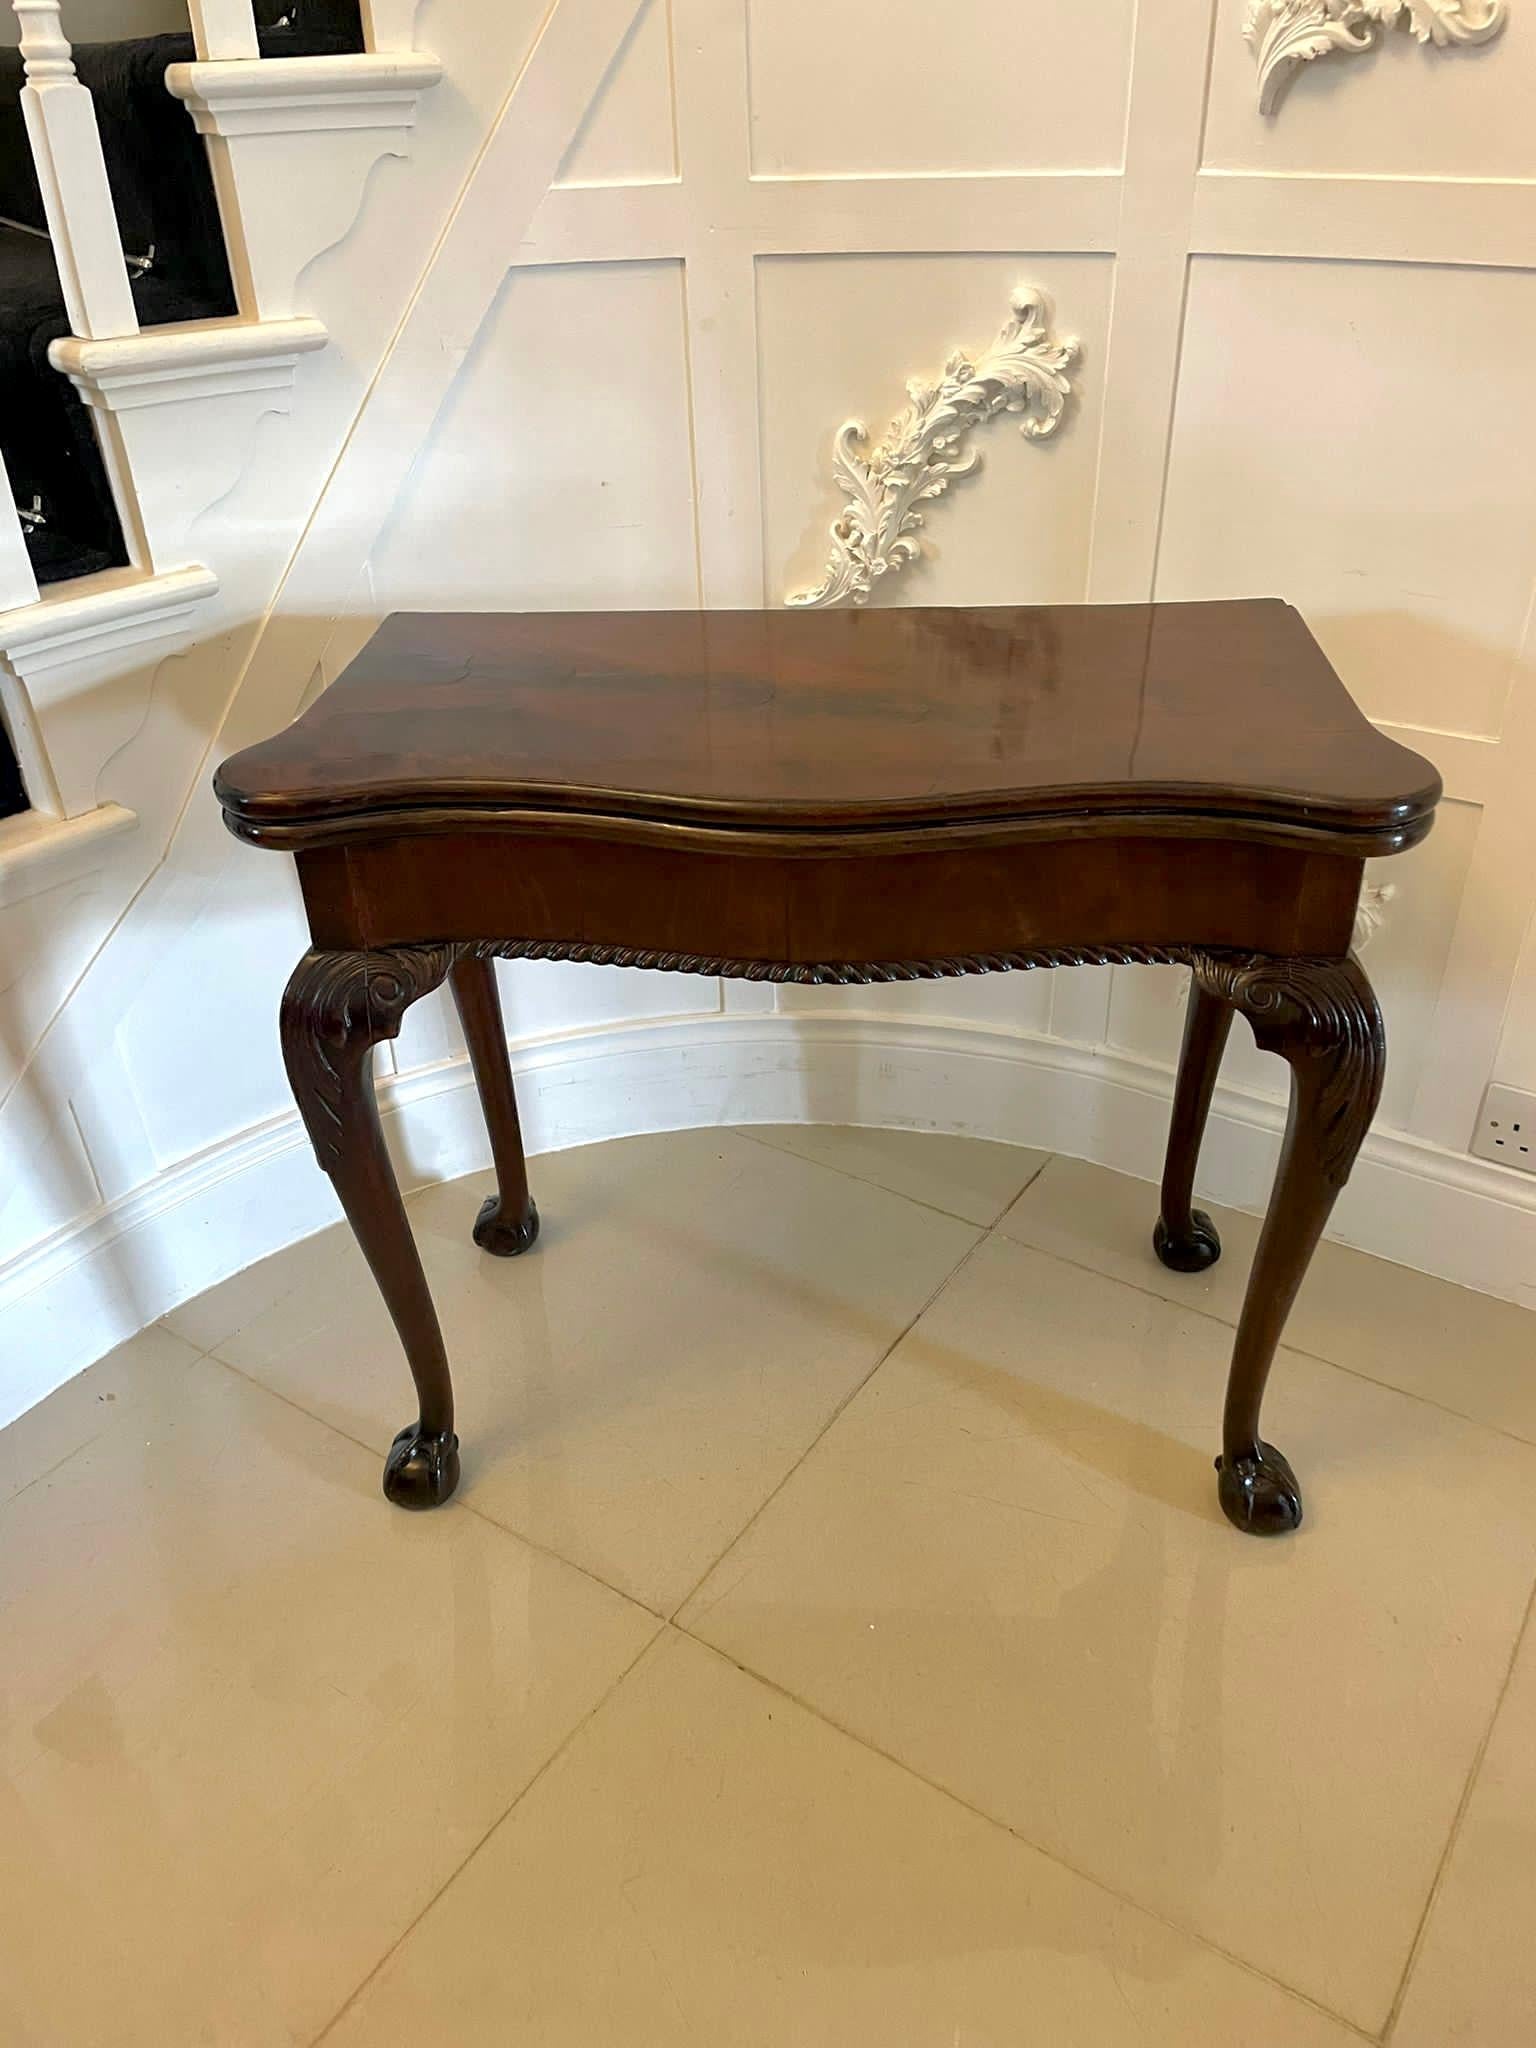 Superb quality antique George III Irish carved mahogany card/side table having a superb quality mahogany serpentine shape fold over top opening to reveal the original baize interior, serpentine shape frieze with a carved edge standing on shaped